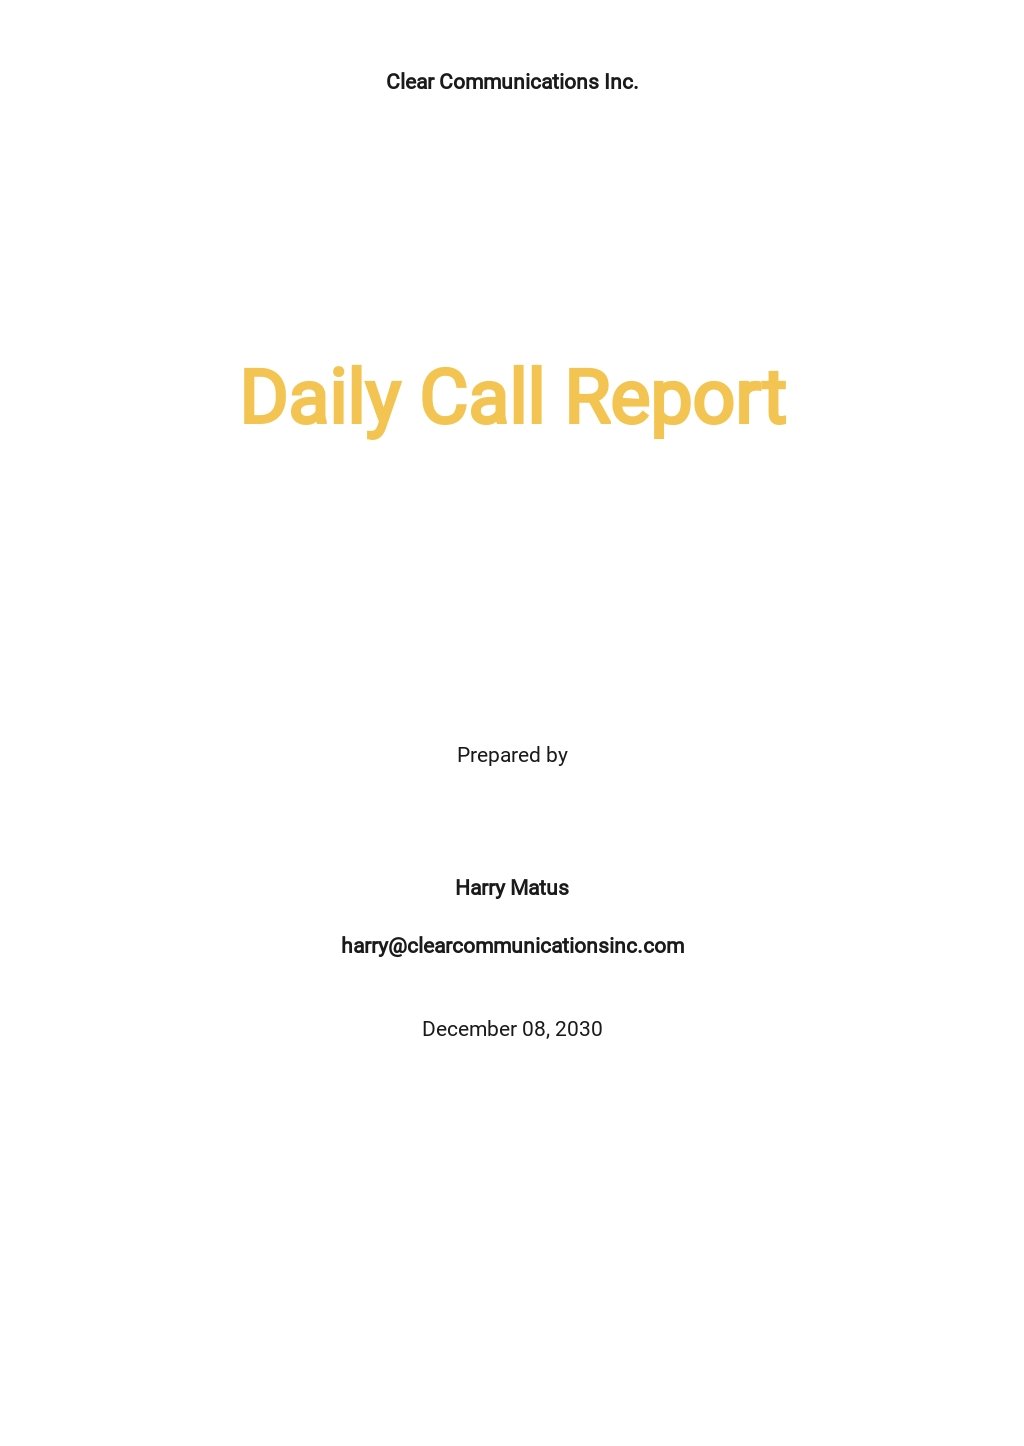 Free Daily Call Report Template.jpe